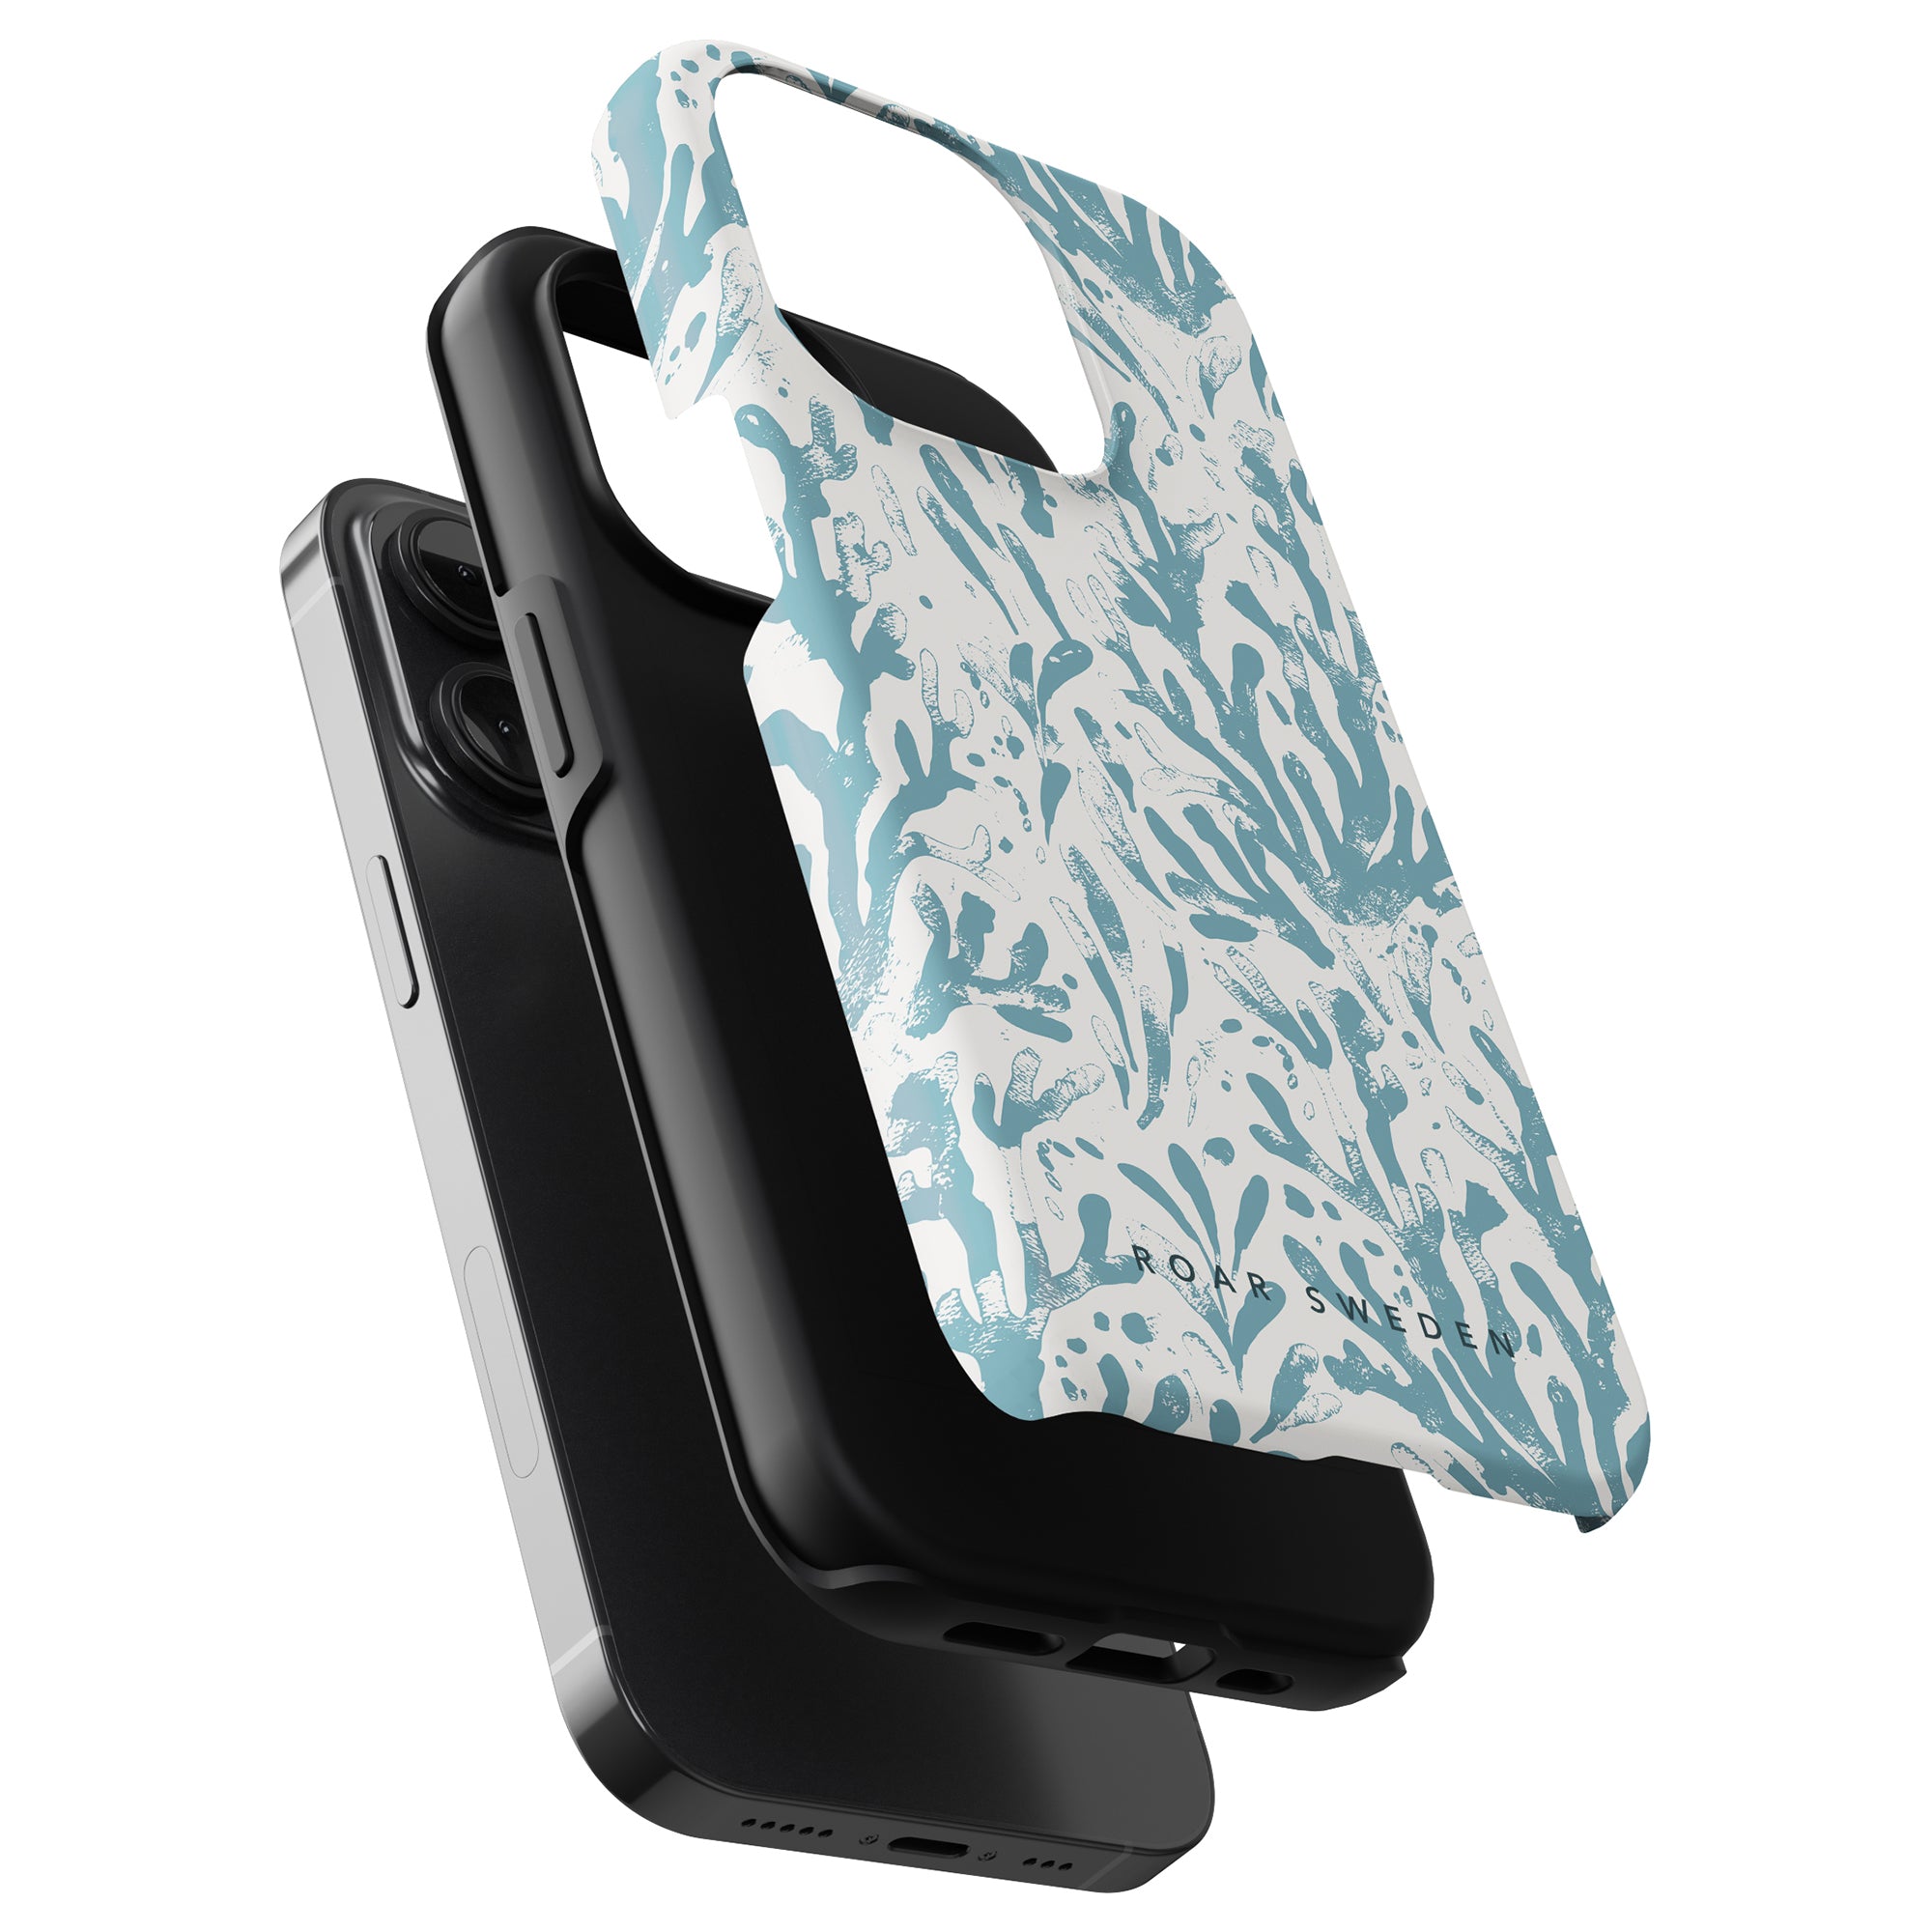 Two smartphones with Sea Life - Tough Cases and a fabric tote bag with a blue and white pattern.